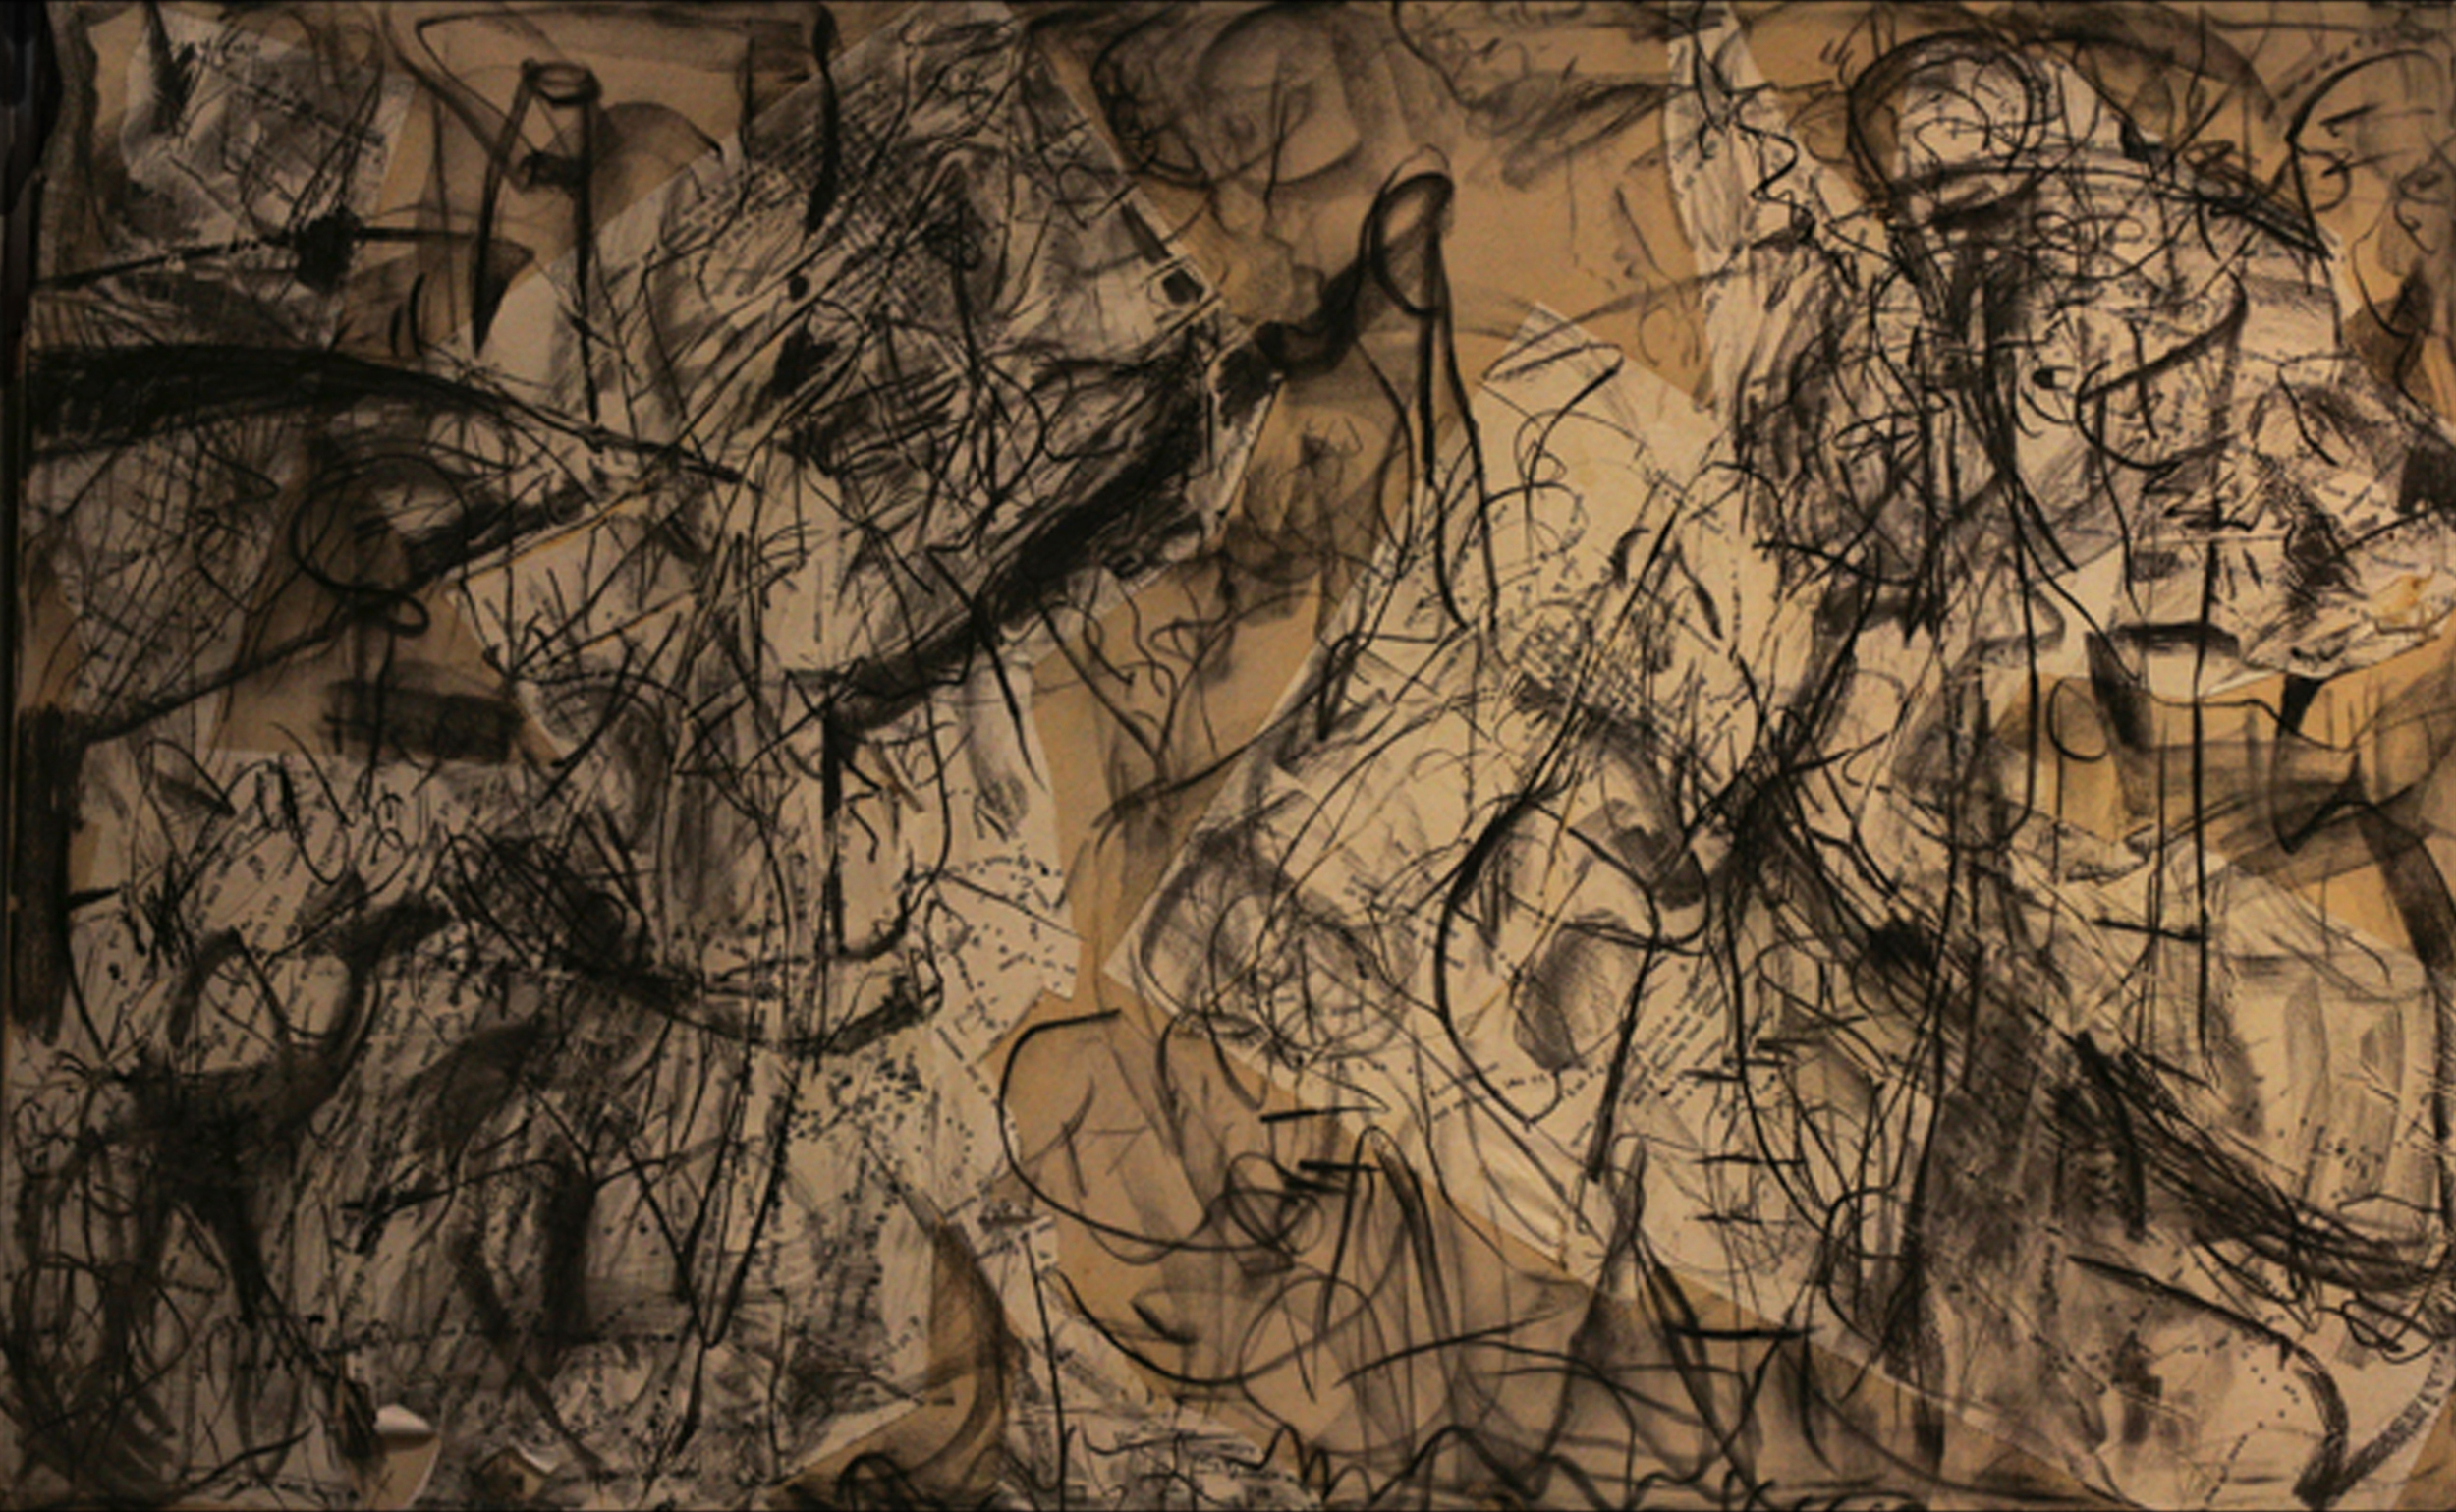 "Wordtree" #11, charcoal, type face, poetry collage, medium on canvas, 60'x 96""